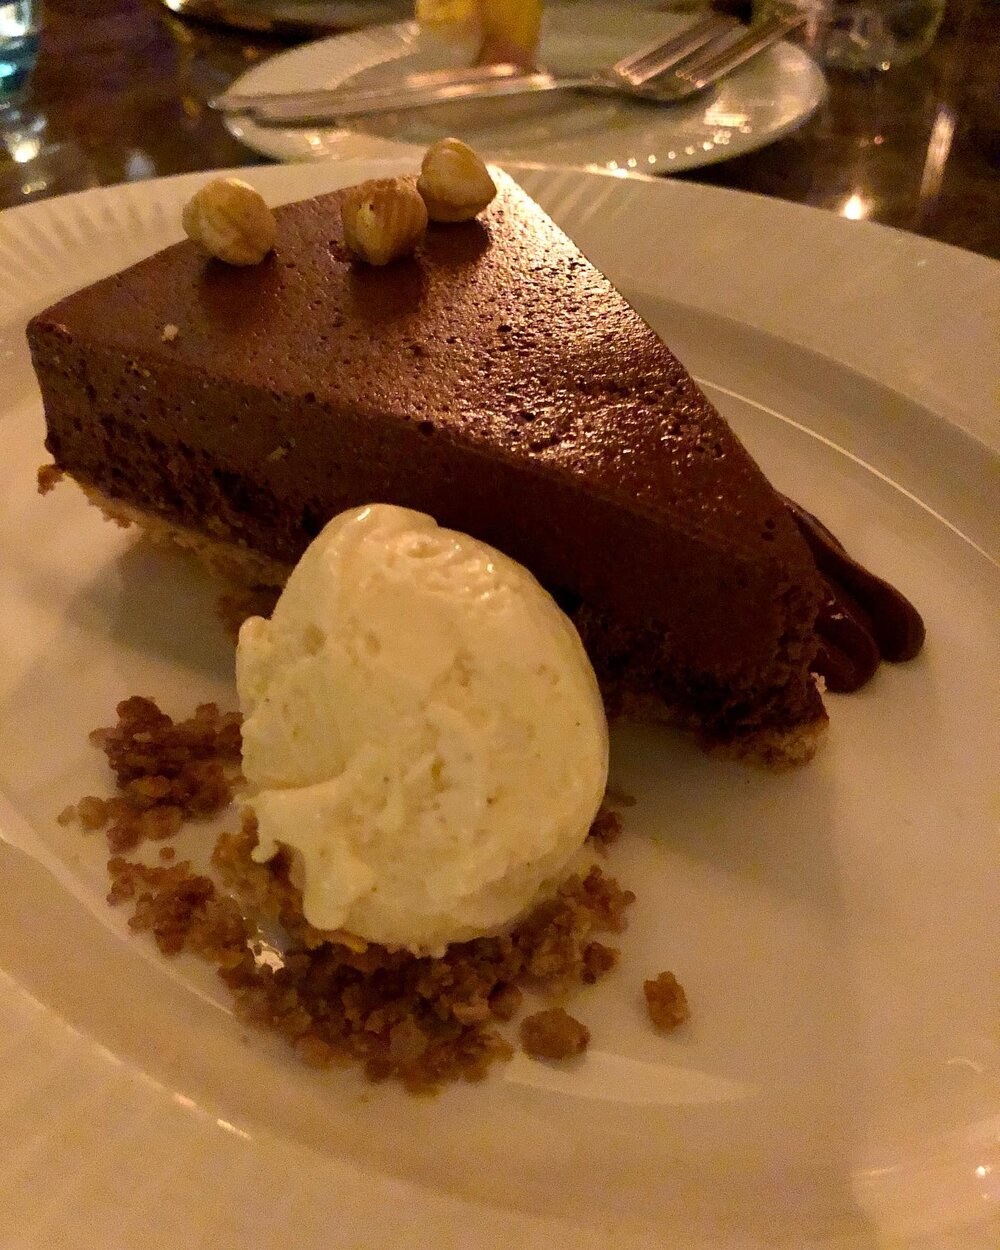 The Hazelnut Chocolate Slice with ice cream at @slowlagos ✨ As perfect as everything else we had for dinner that day. 

#eeeeeats #eatdrinklagos